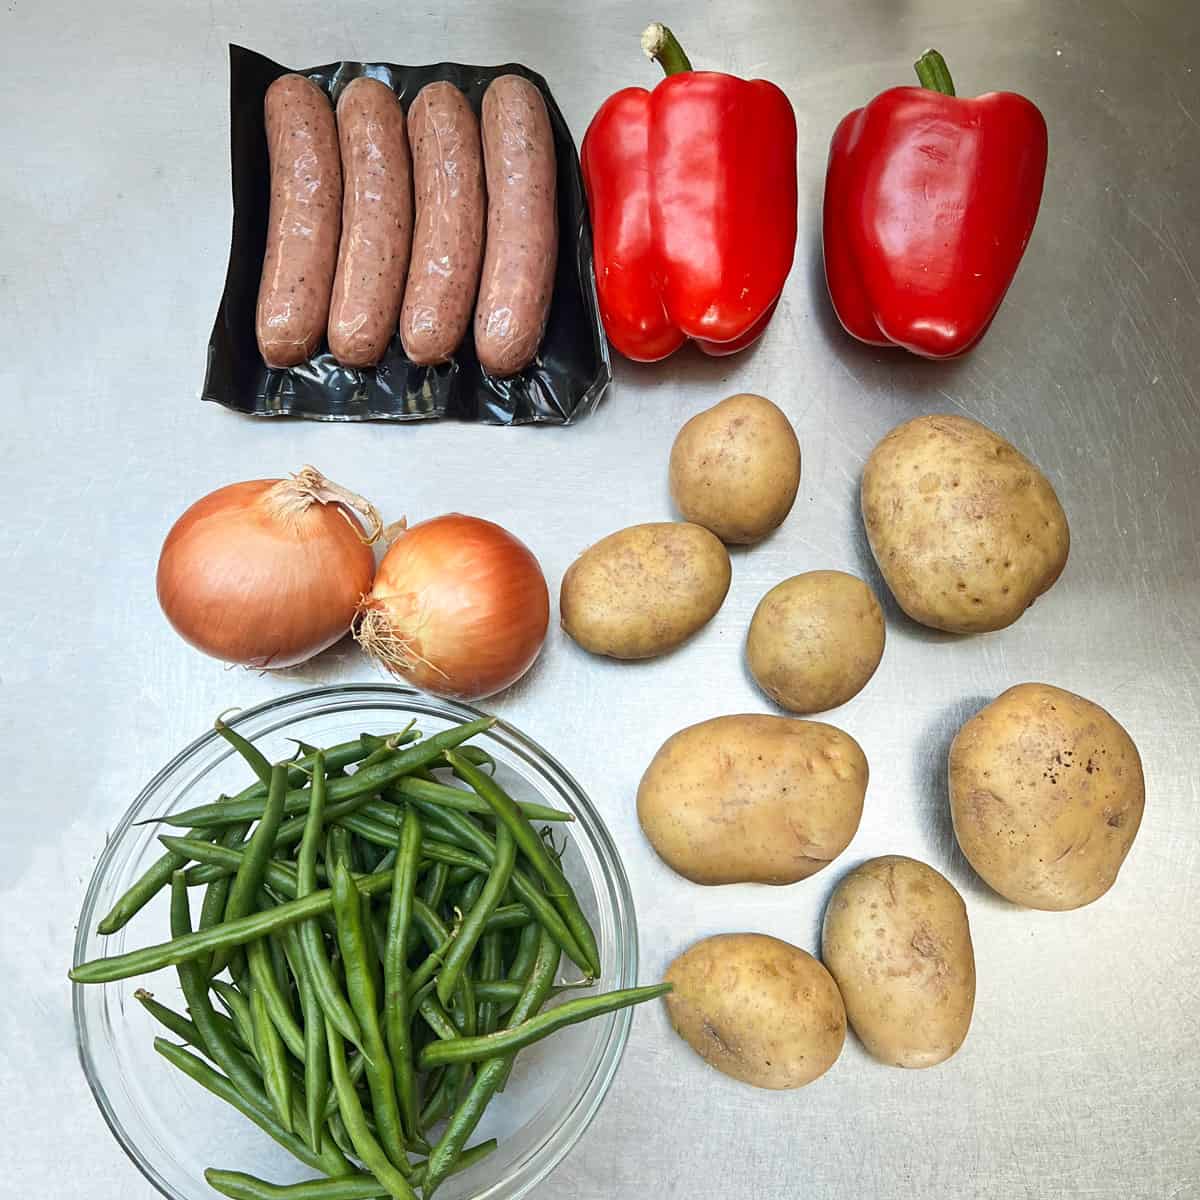 Ingredients on a stainless steel countertop: 4-pack of smoked chicken sausages, 8 yukon gold potatoes, glass bowl filled with green beans, two yellow onions, two red bell peppers.